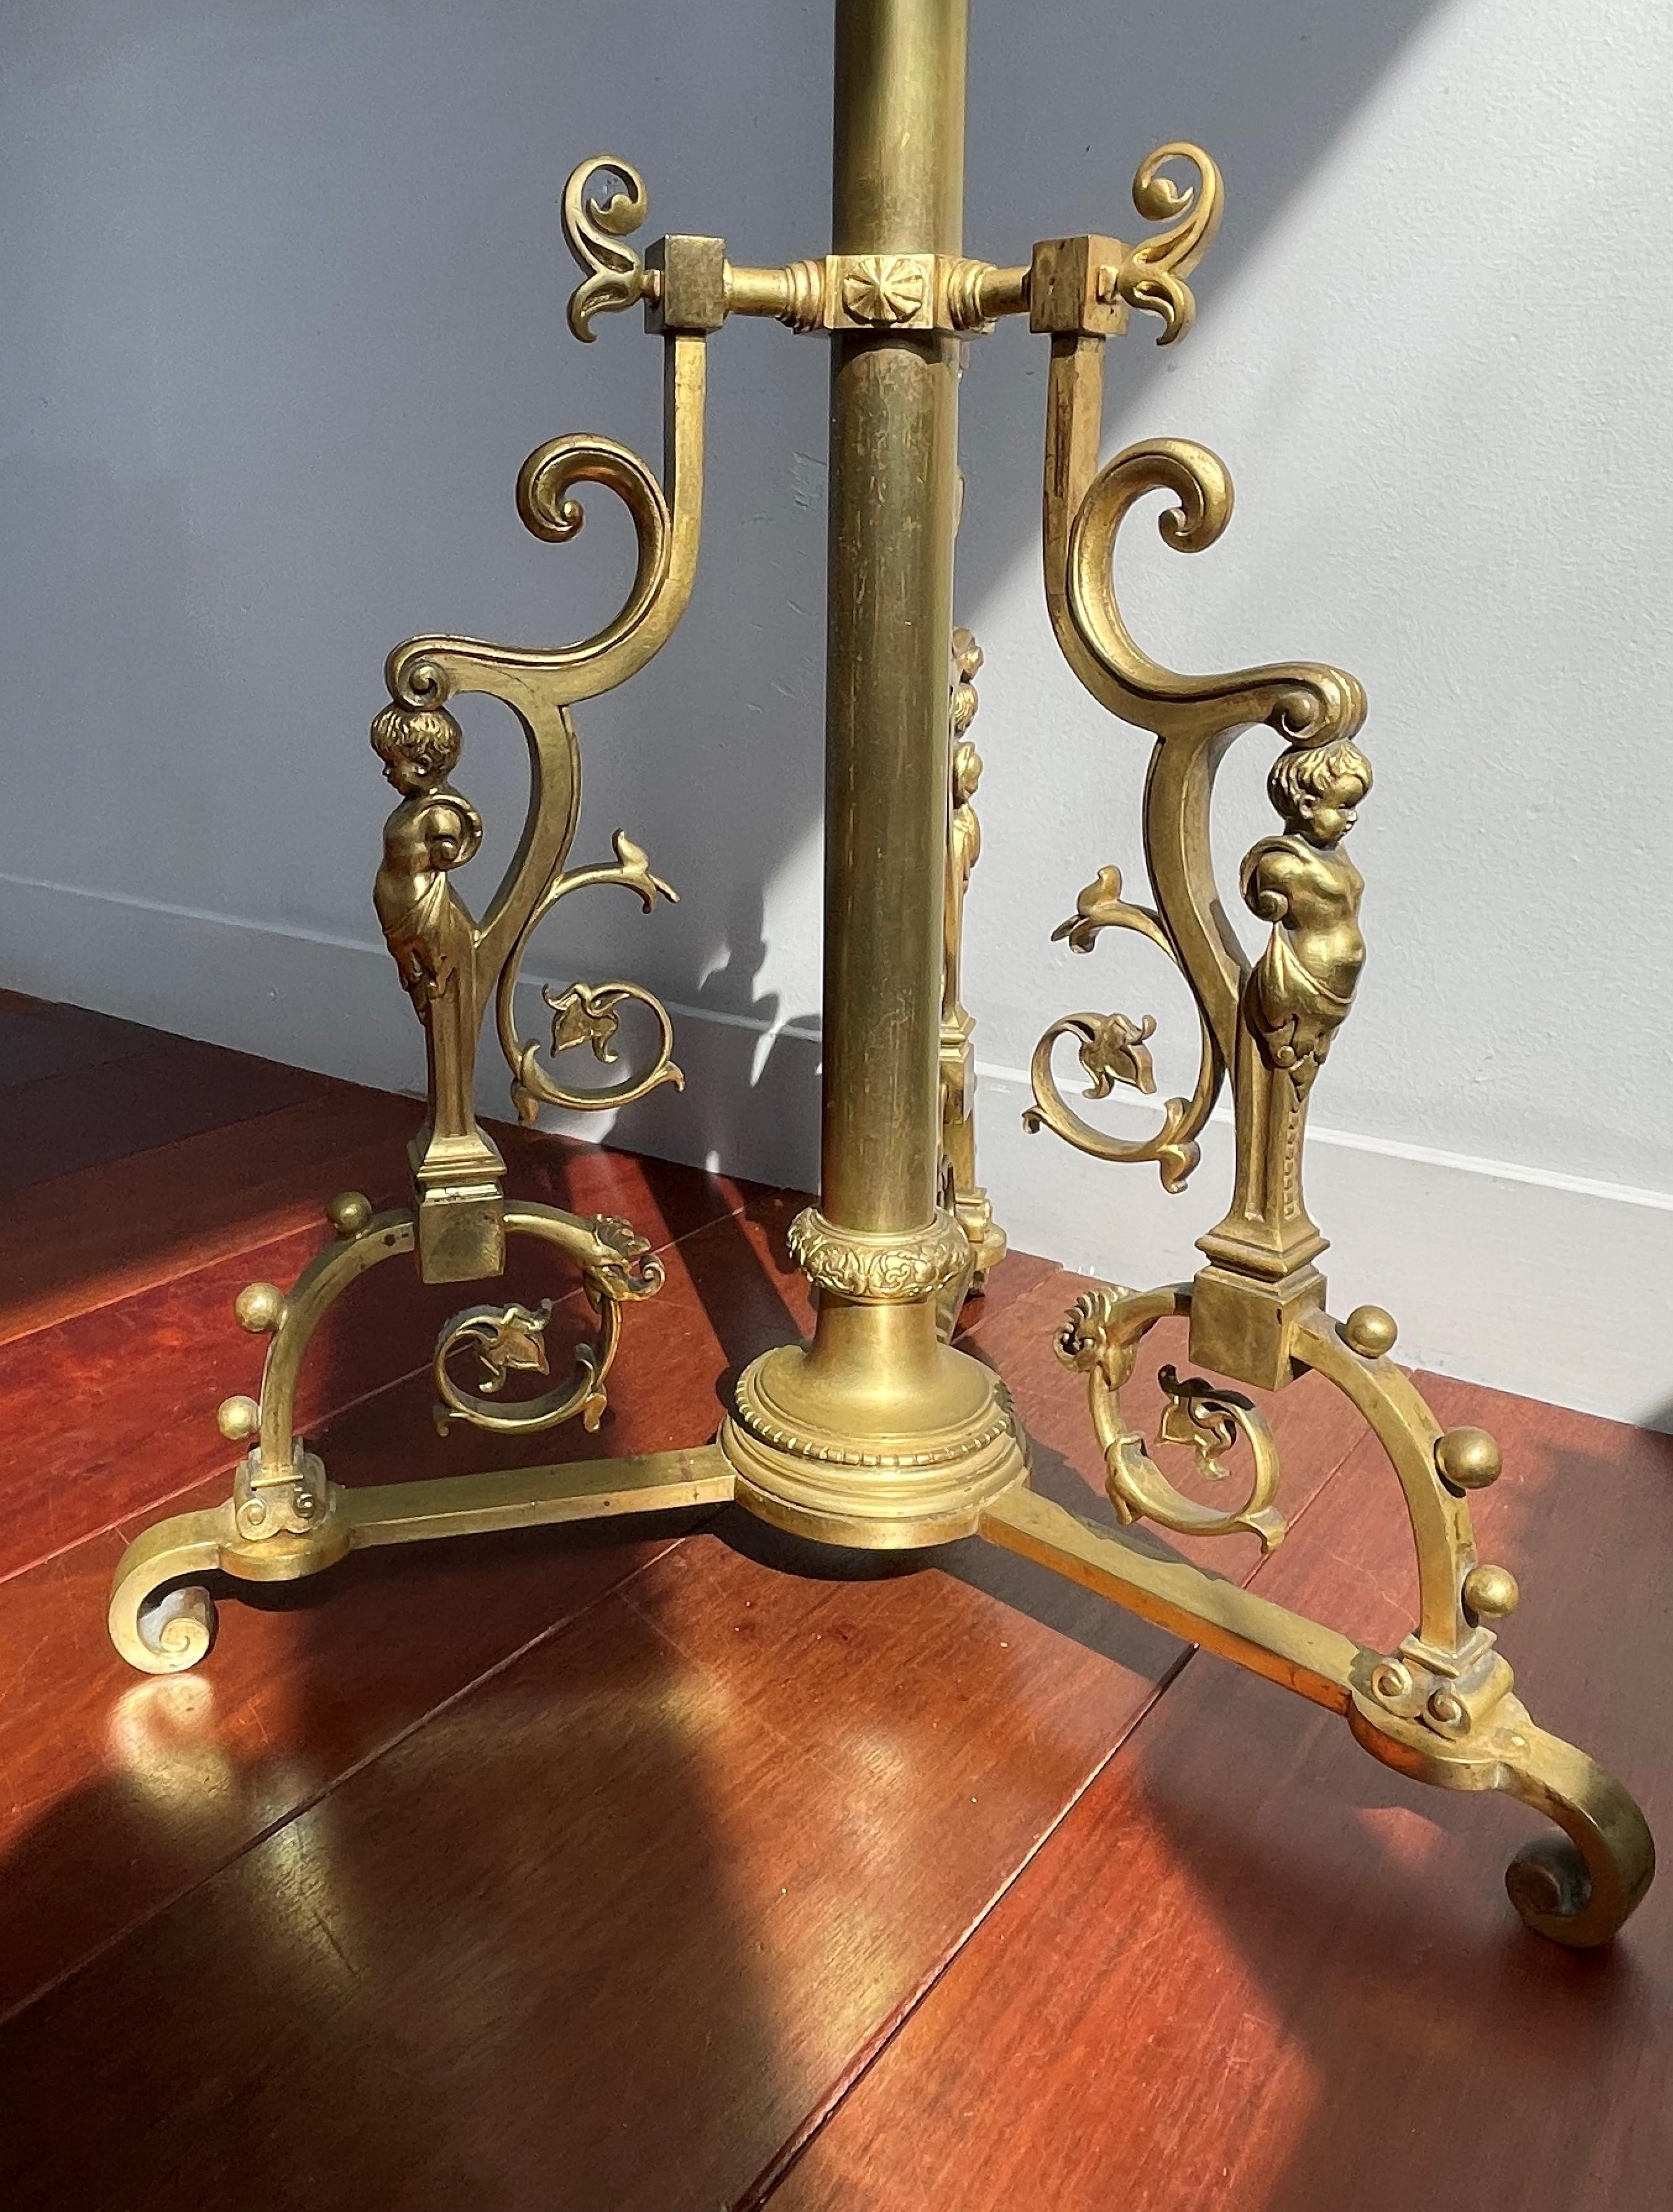 Unique and great design, antique bronze oil lamp with angel sculptures, by one of Europe's finest.

There is a reason why the late 19th and the early 20th century have produced some of the best furniture makers, lamp designers, sculptors, wood